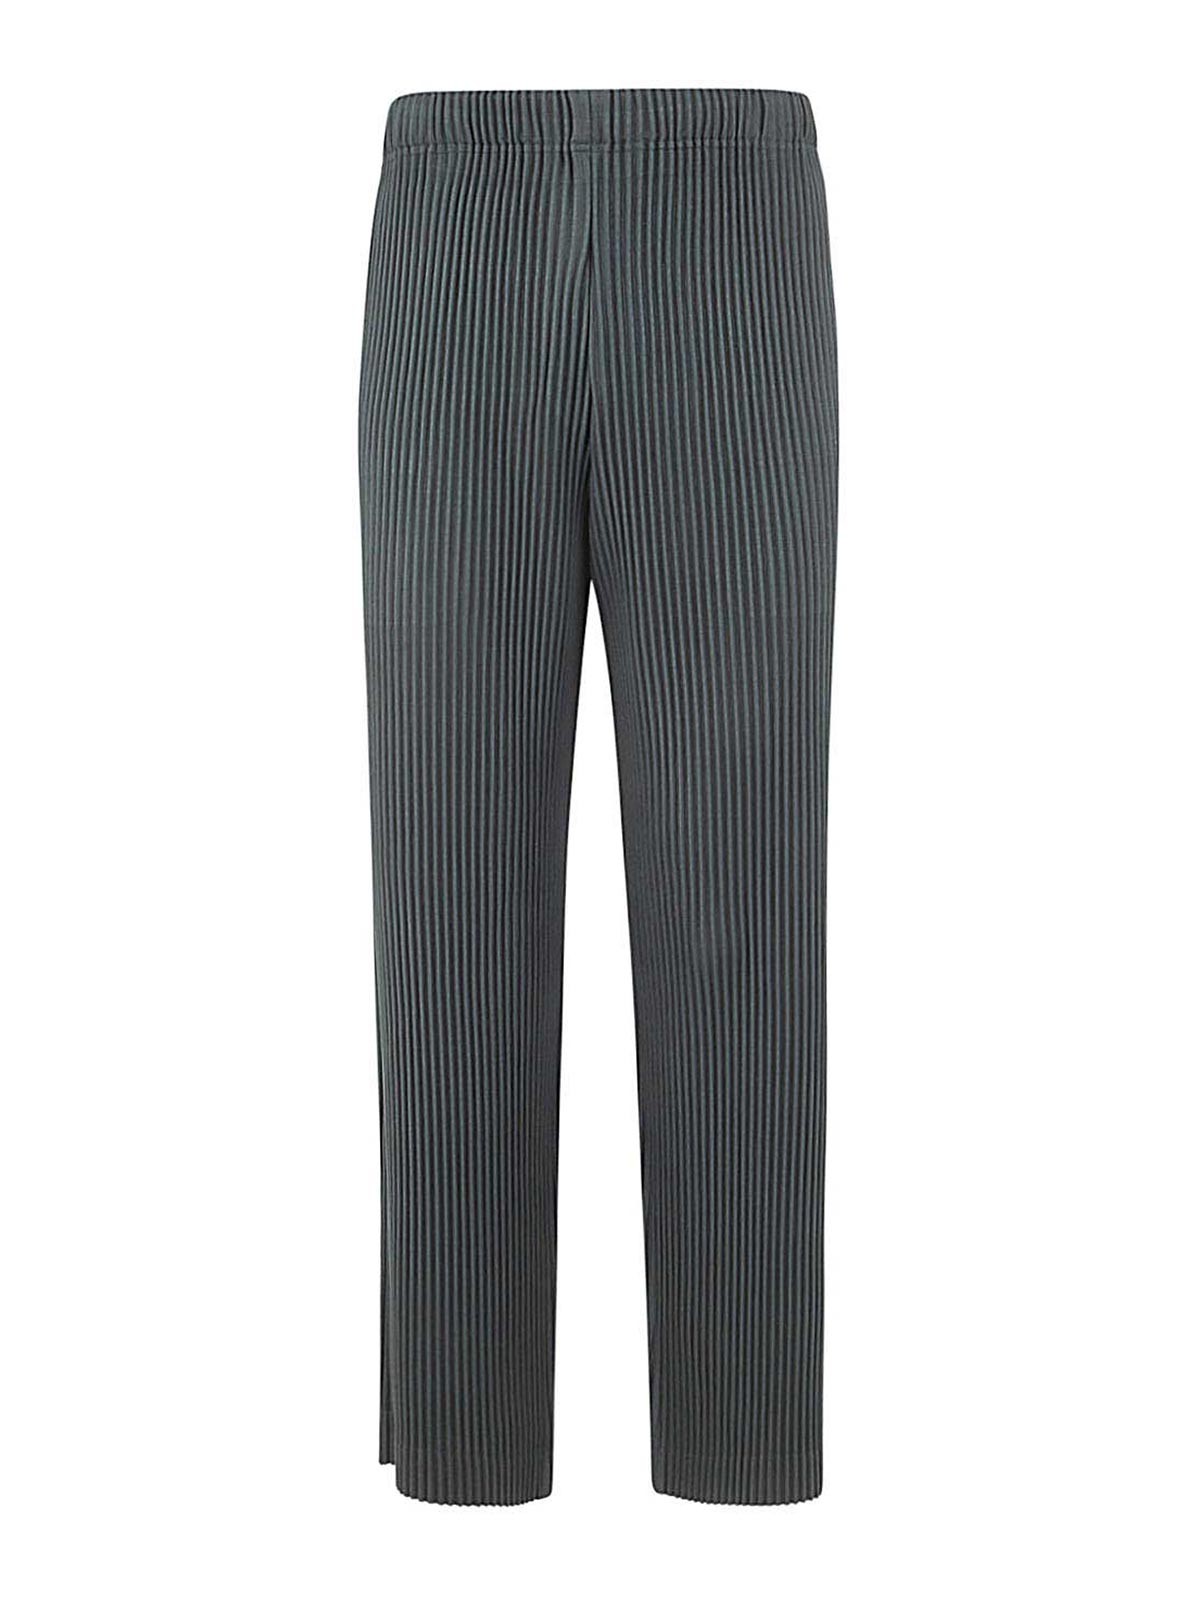 Homme Plissé Issey Miyake - Pleated Pants in Black | Pleated pants, Black  fashion, Issey miyake